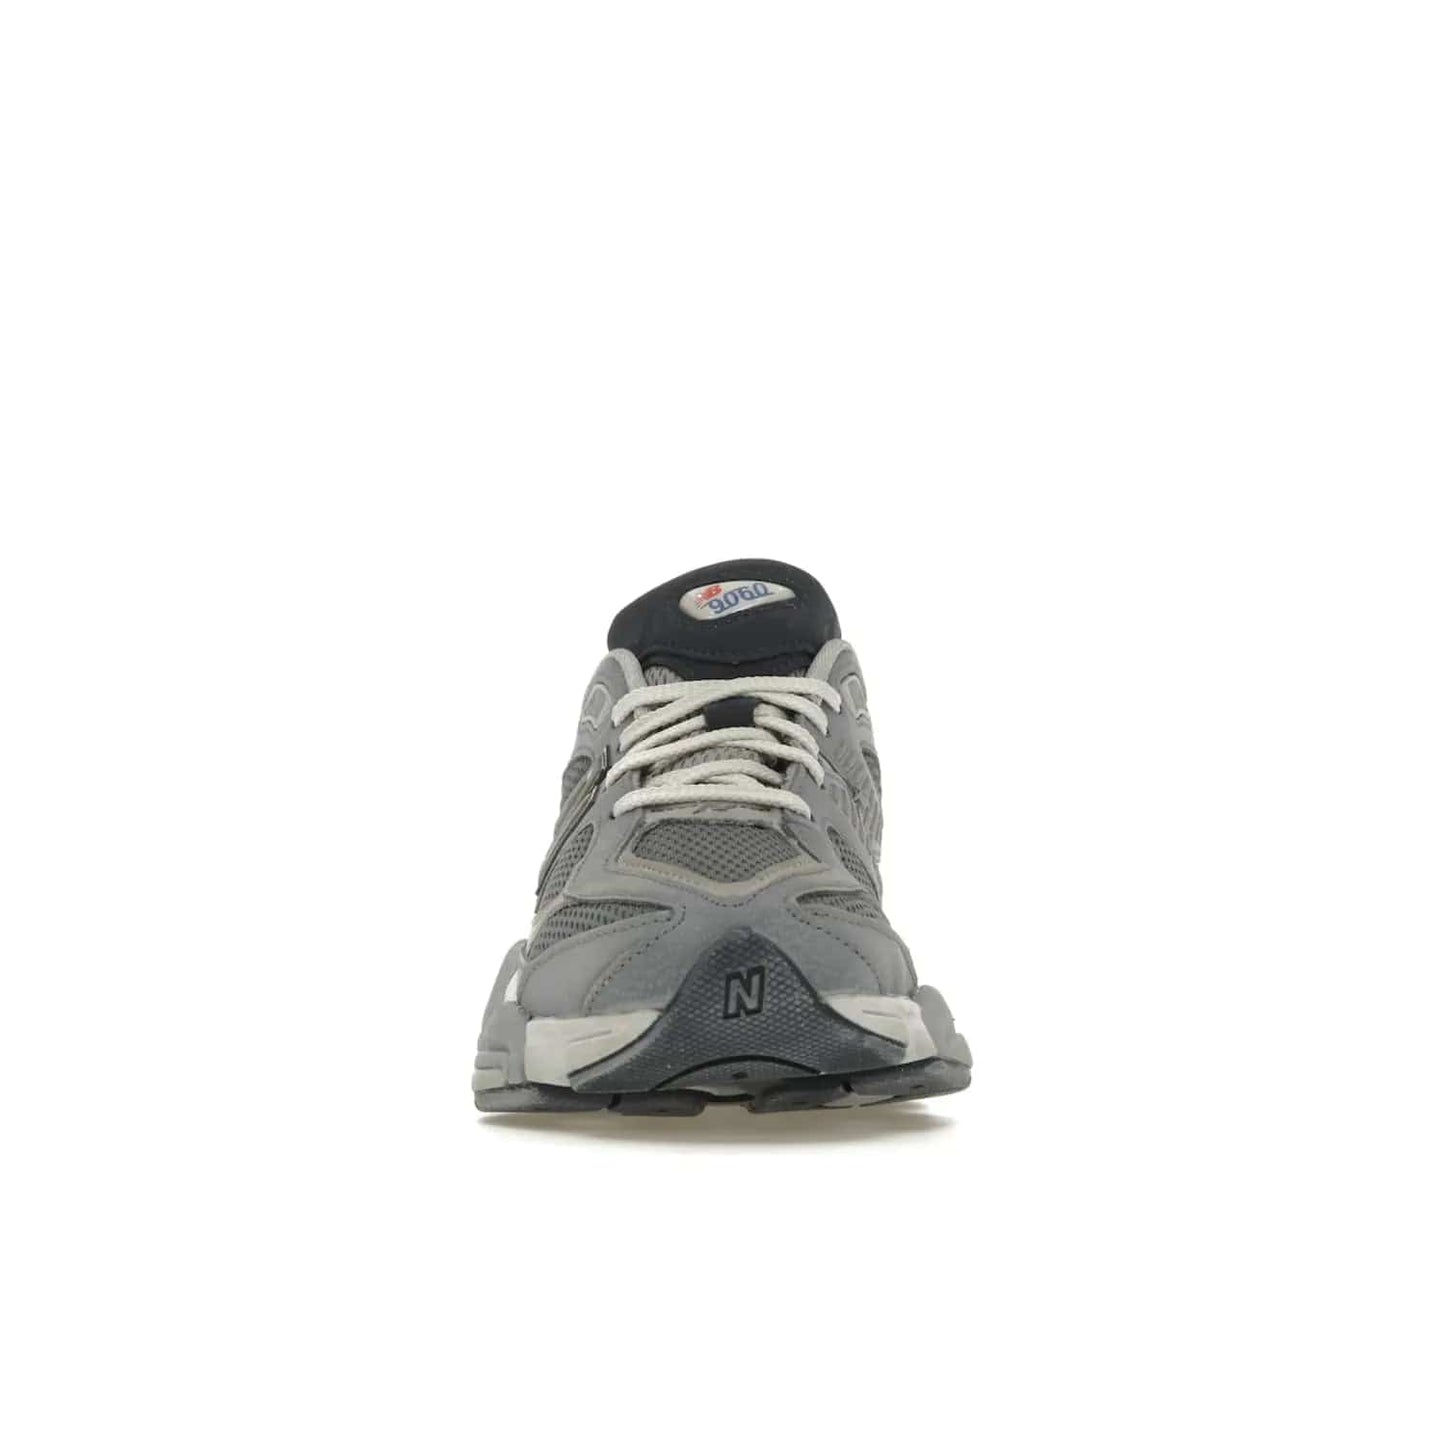 New Balance 9060 Grey Day (2023) - Image 10 - Only at www.BallersClubKickz.com - #
Sporty-meets-stylish in the New Balance 9060 Grey Day sneaker. Designed with Arctic Grey, Steel, and Silver Metallic, it offers an edgy but wearable look along with classic NB comfort and quality.